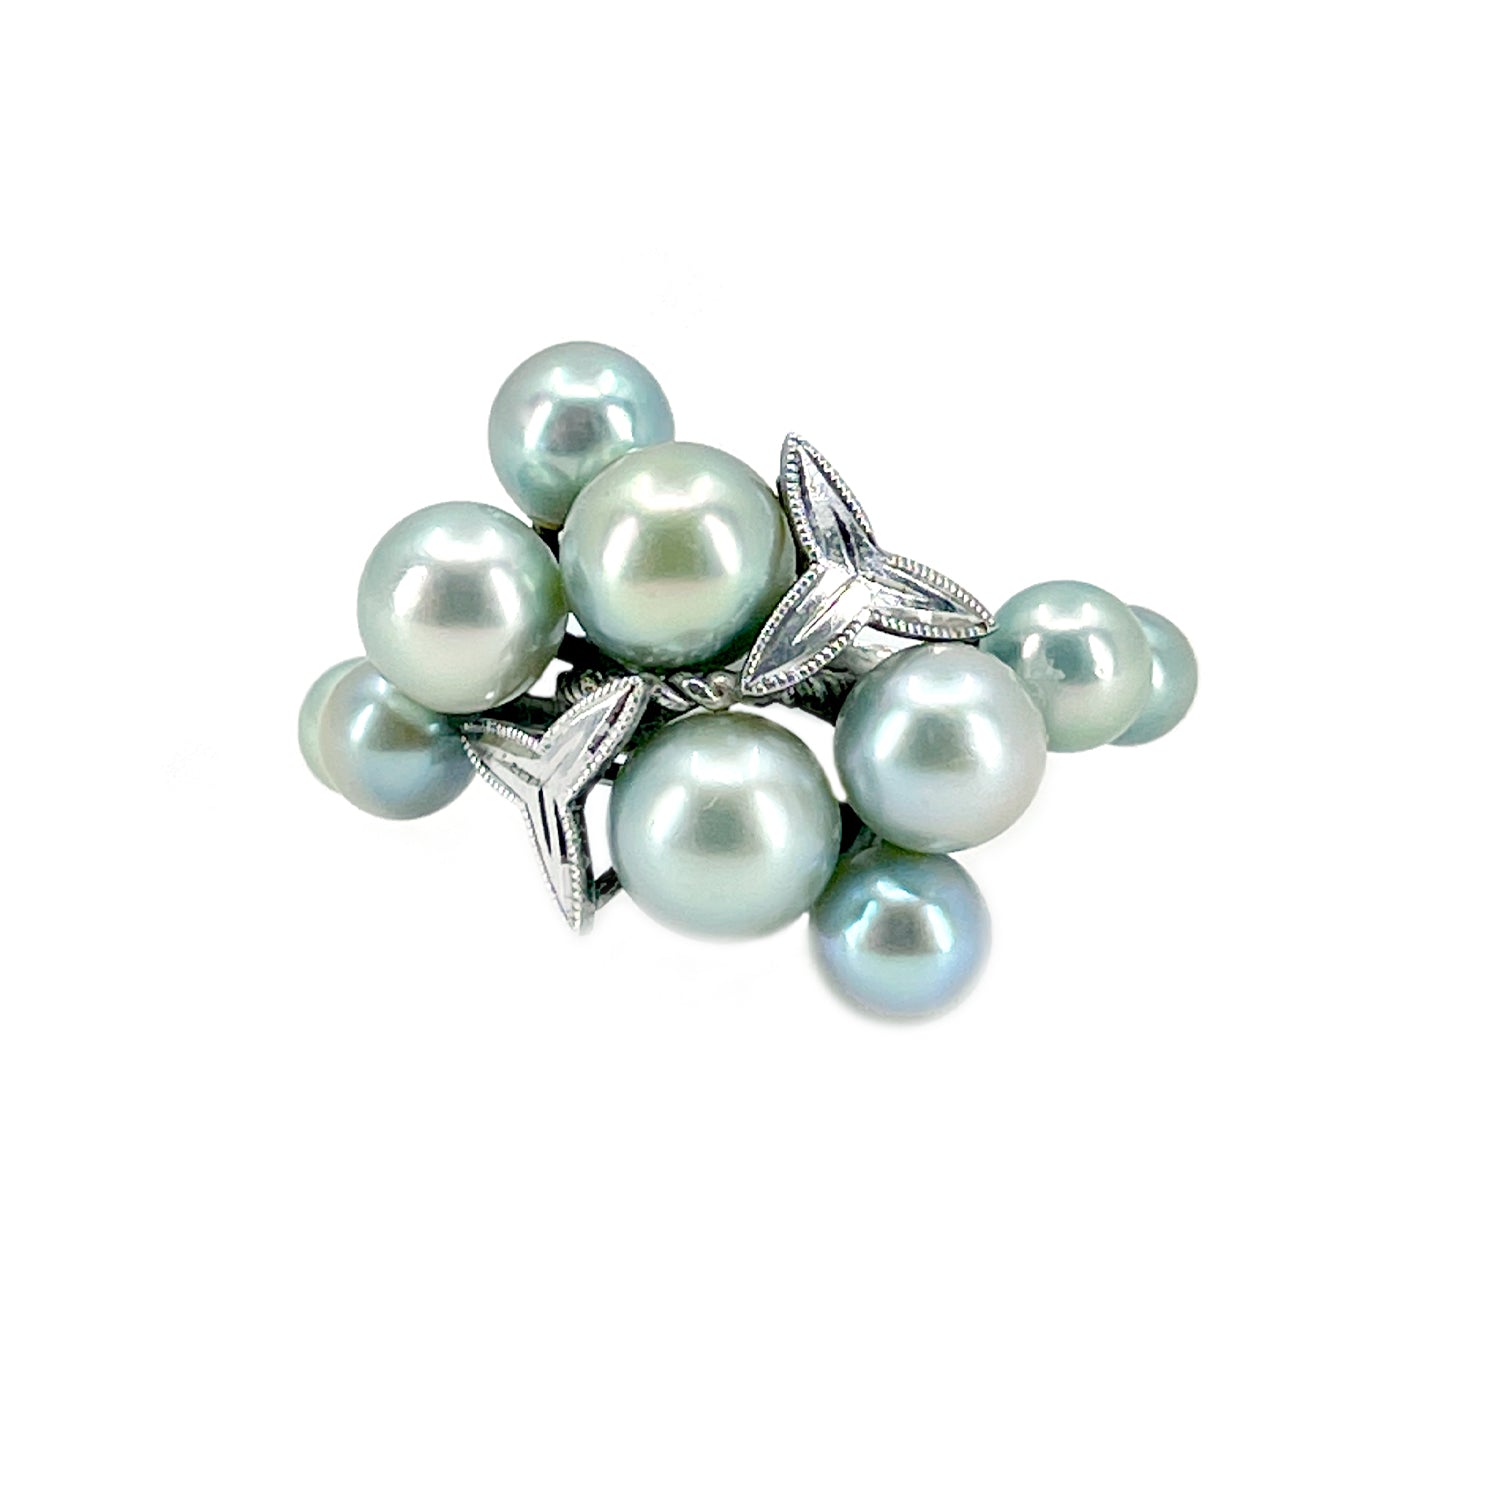 Nouveau Cluster Blue Green Japanese Saltwater Akoya Cultured Pearl Vintage Ring- Sterling Silver Sz 6 3/4